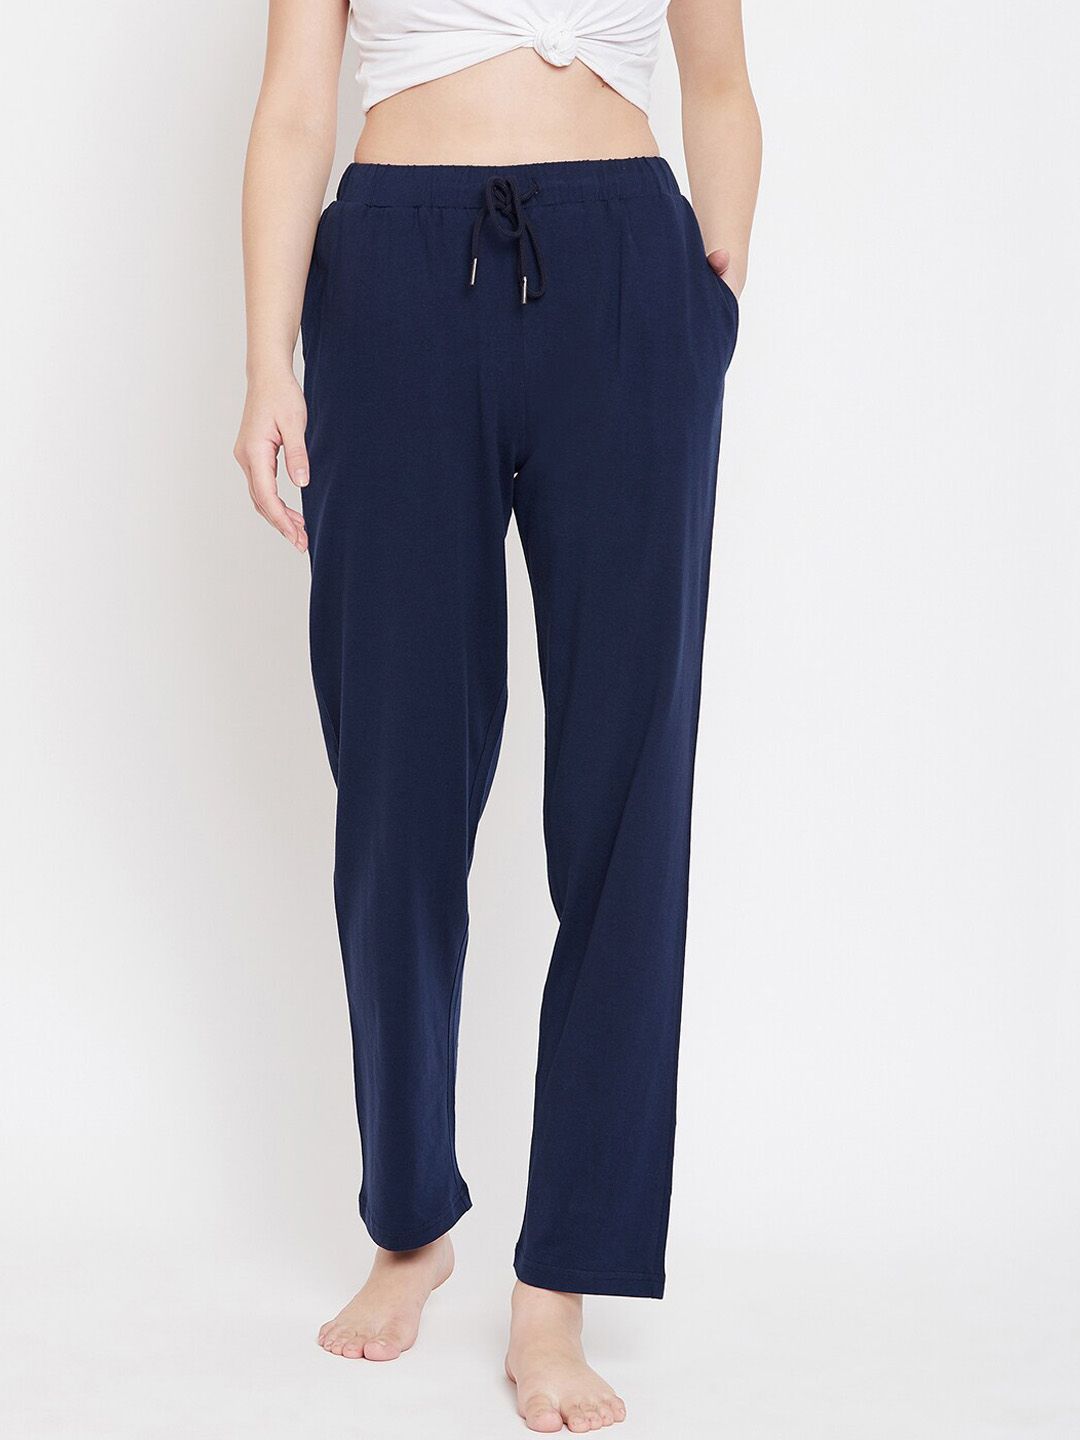 Hypernation Women Navy Blue Solid Lounge Pants Price in India